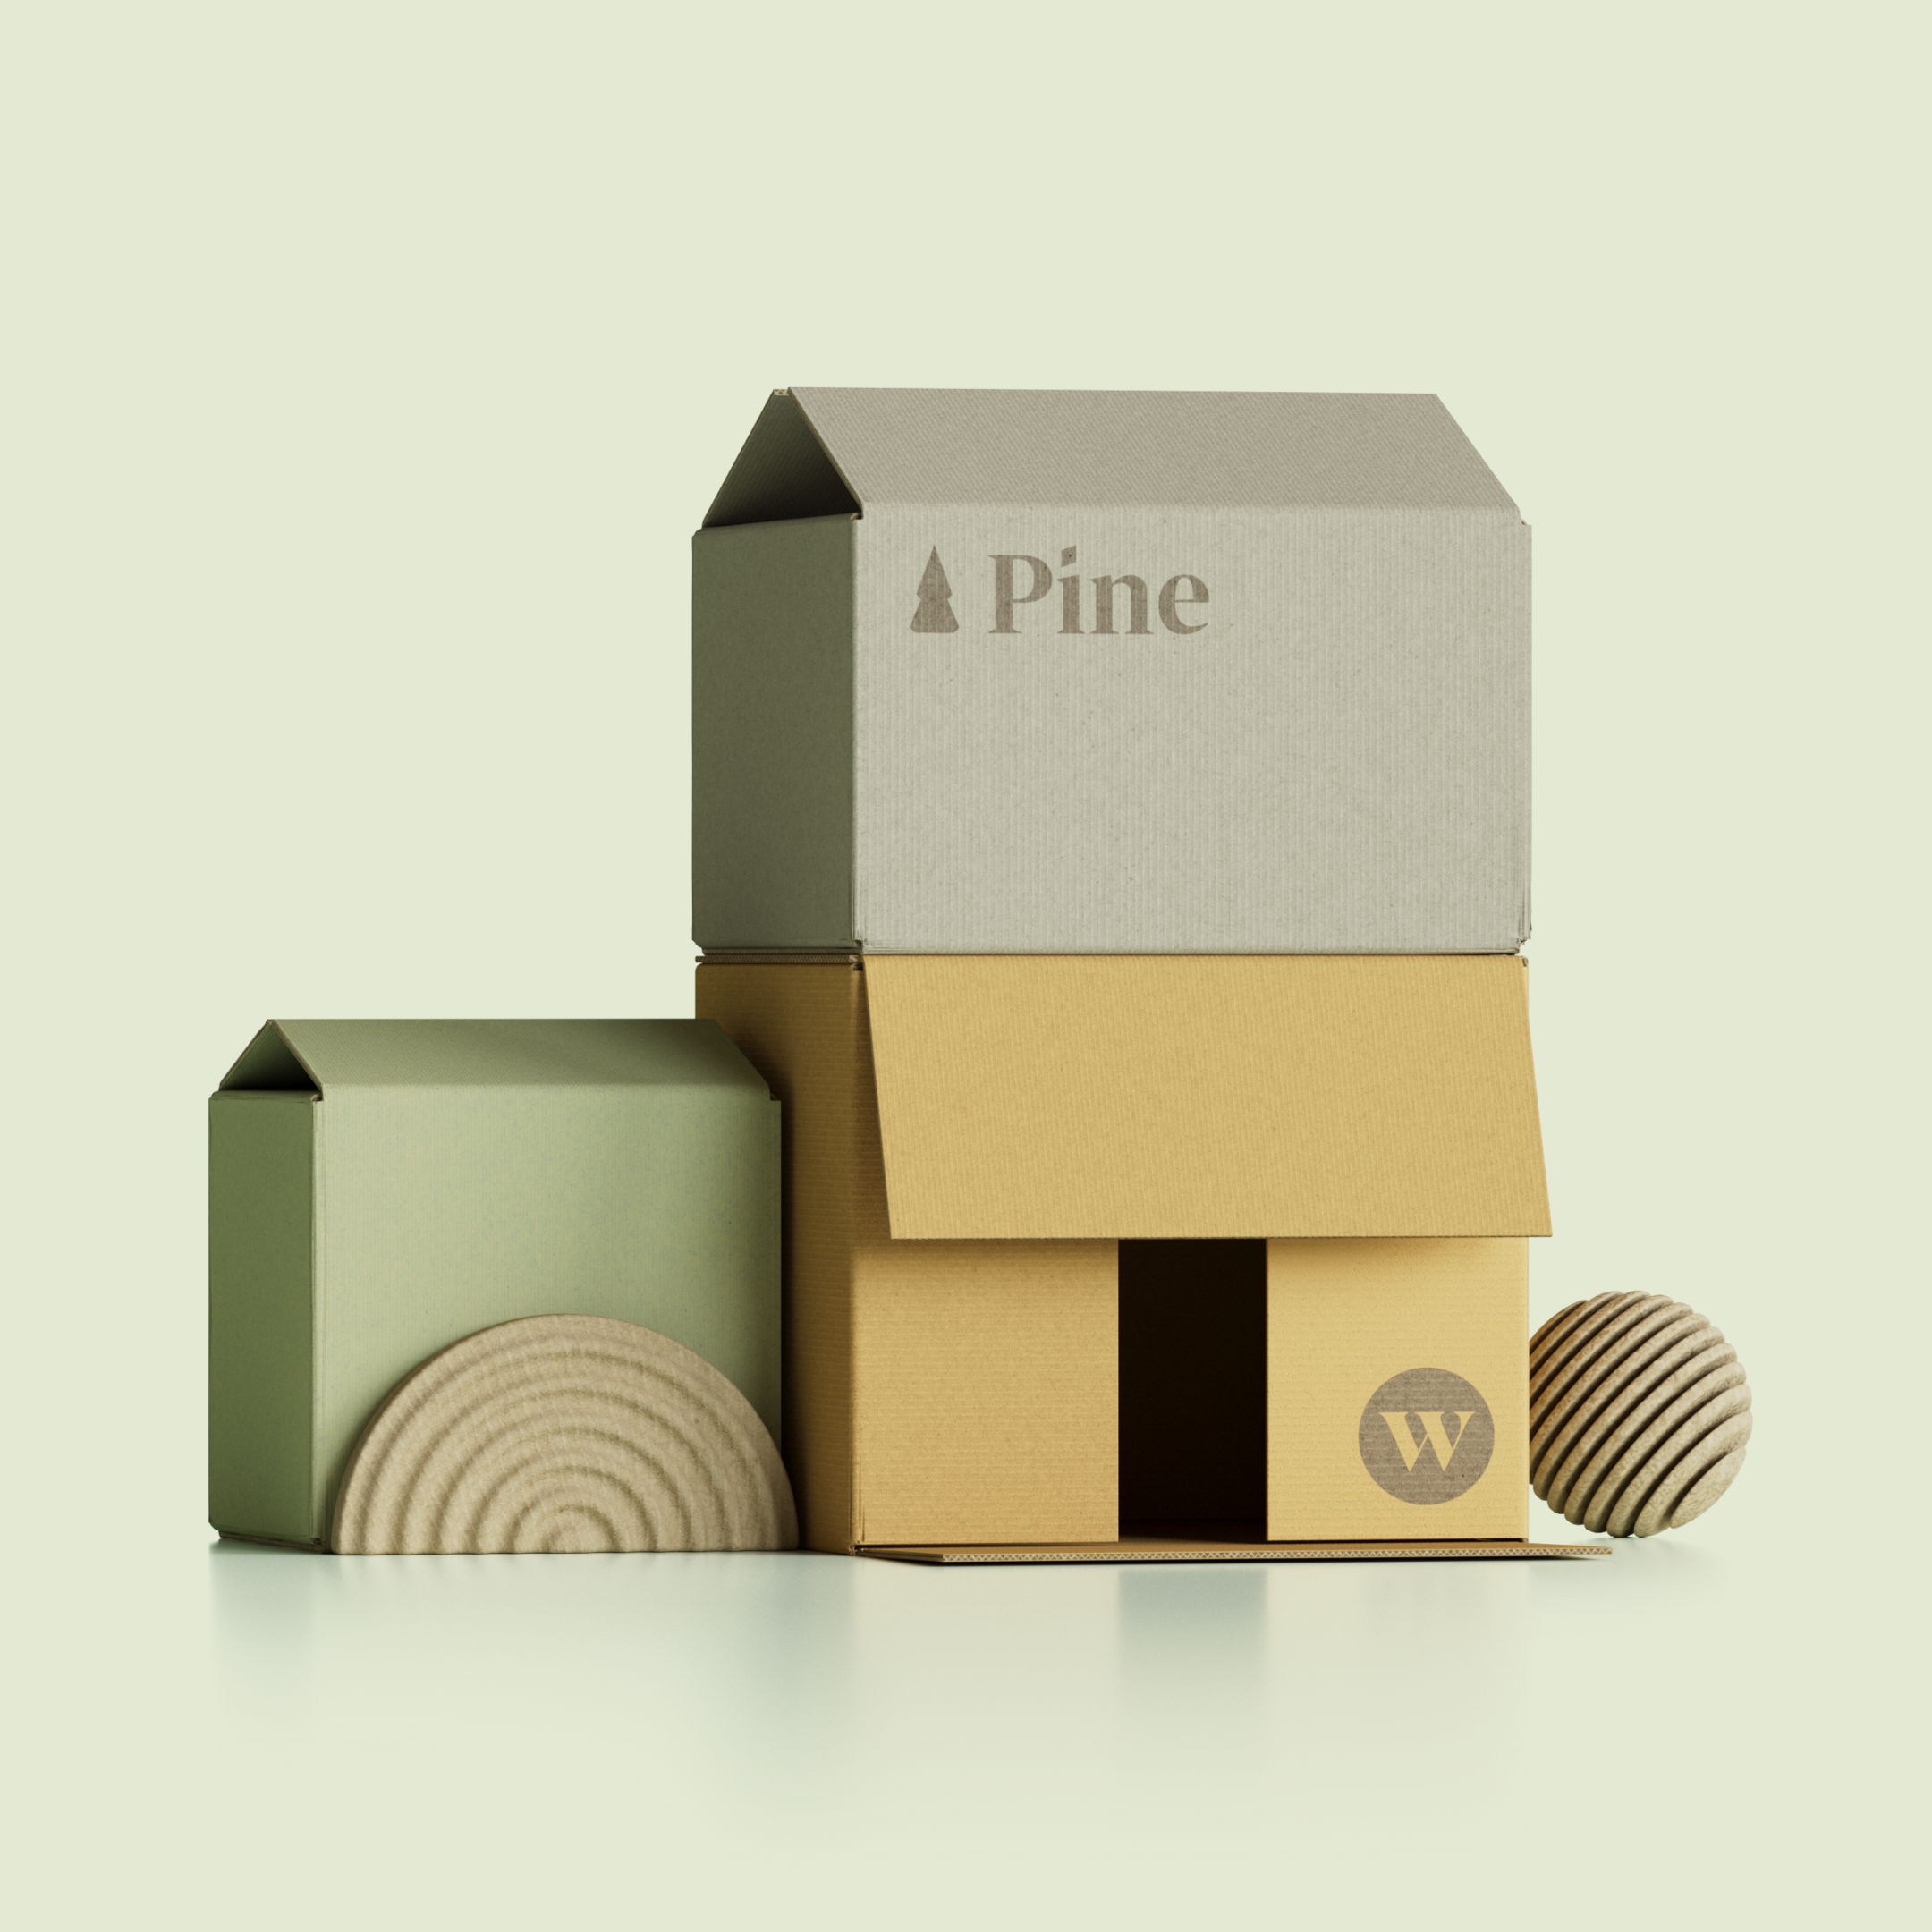 Wealthsimple and Pine unlock more choice when buying a home